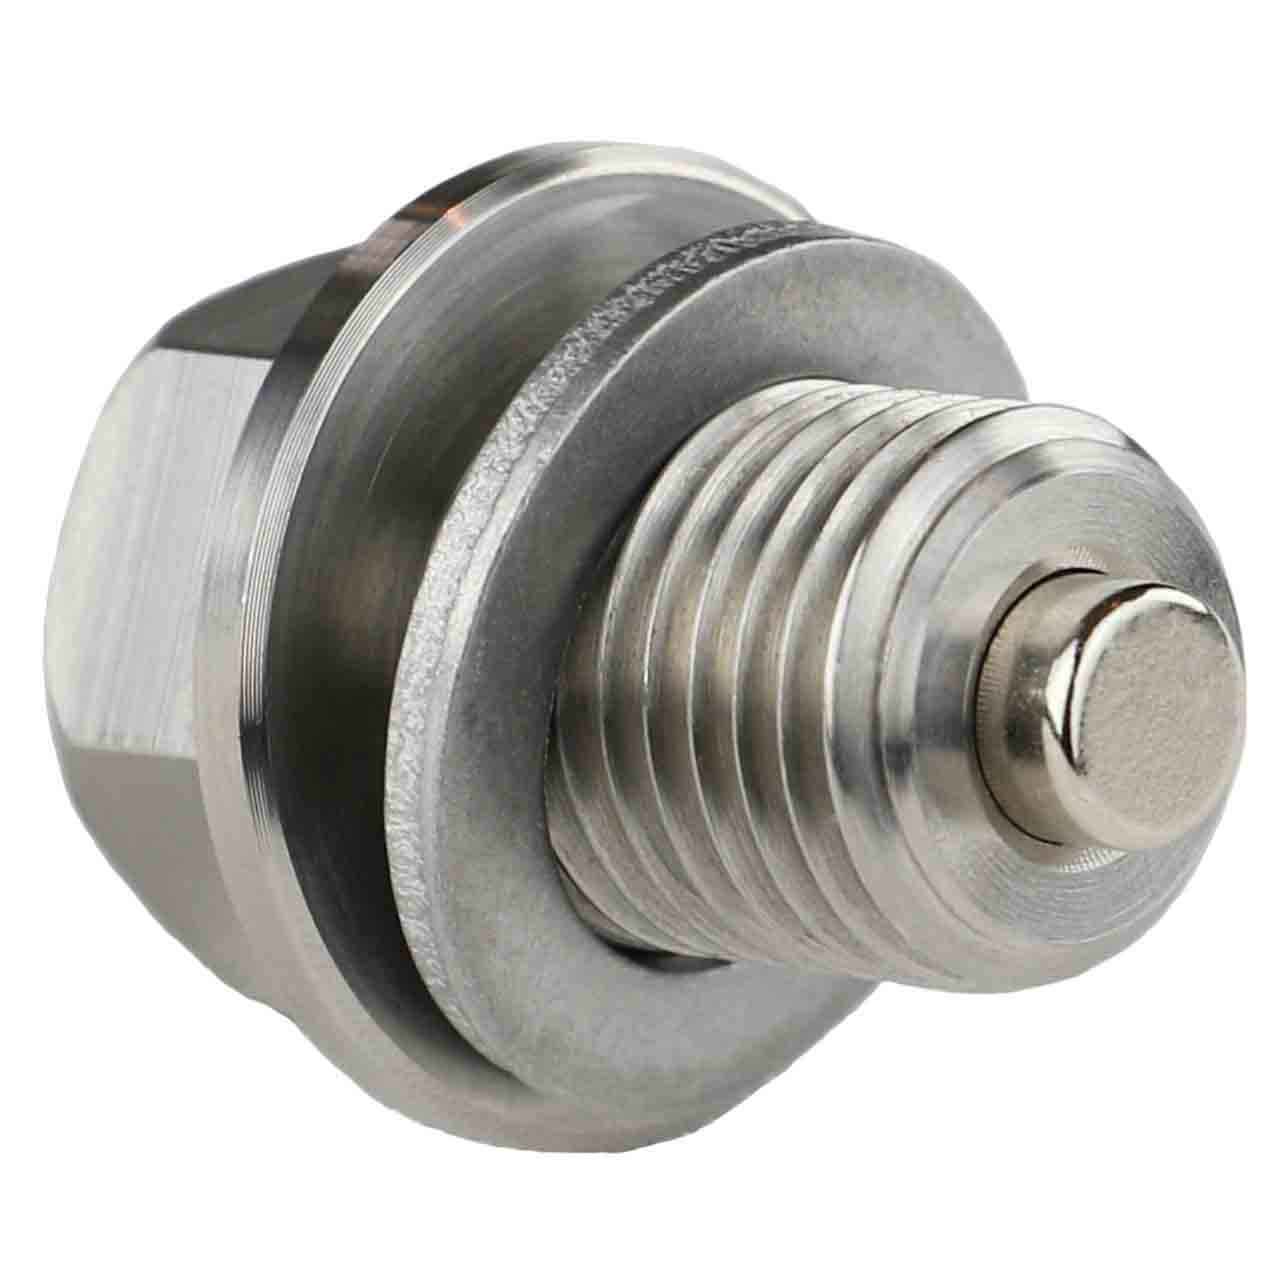 3083453 for Polaris - Stainless Steel Magnetic Oil Drain Plug with Neodymium Magnet - Made In USA